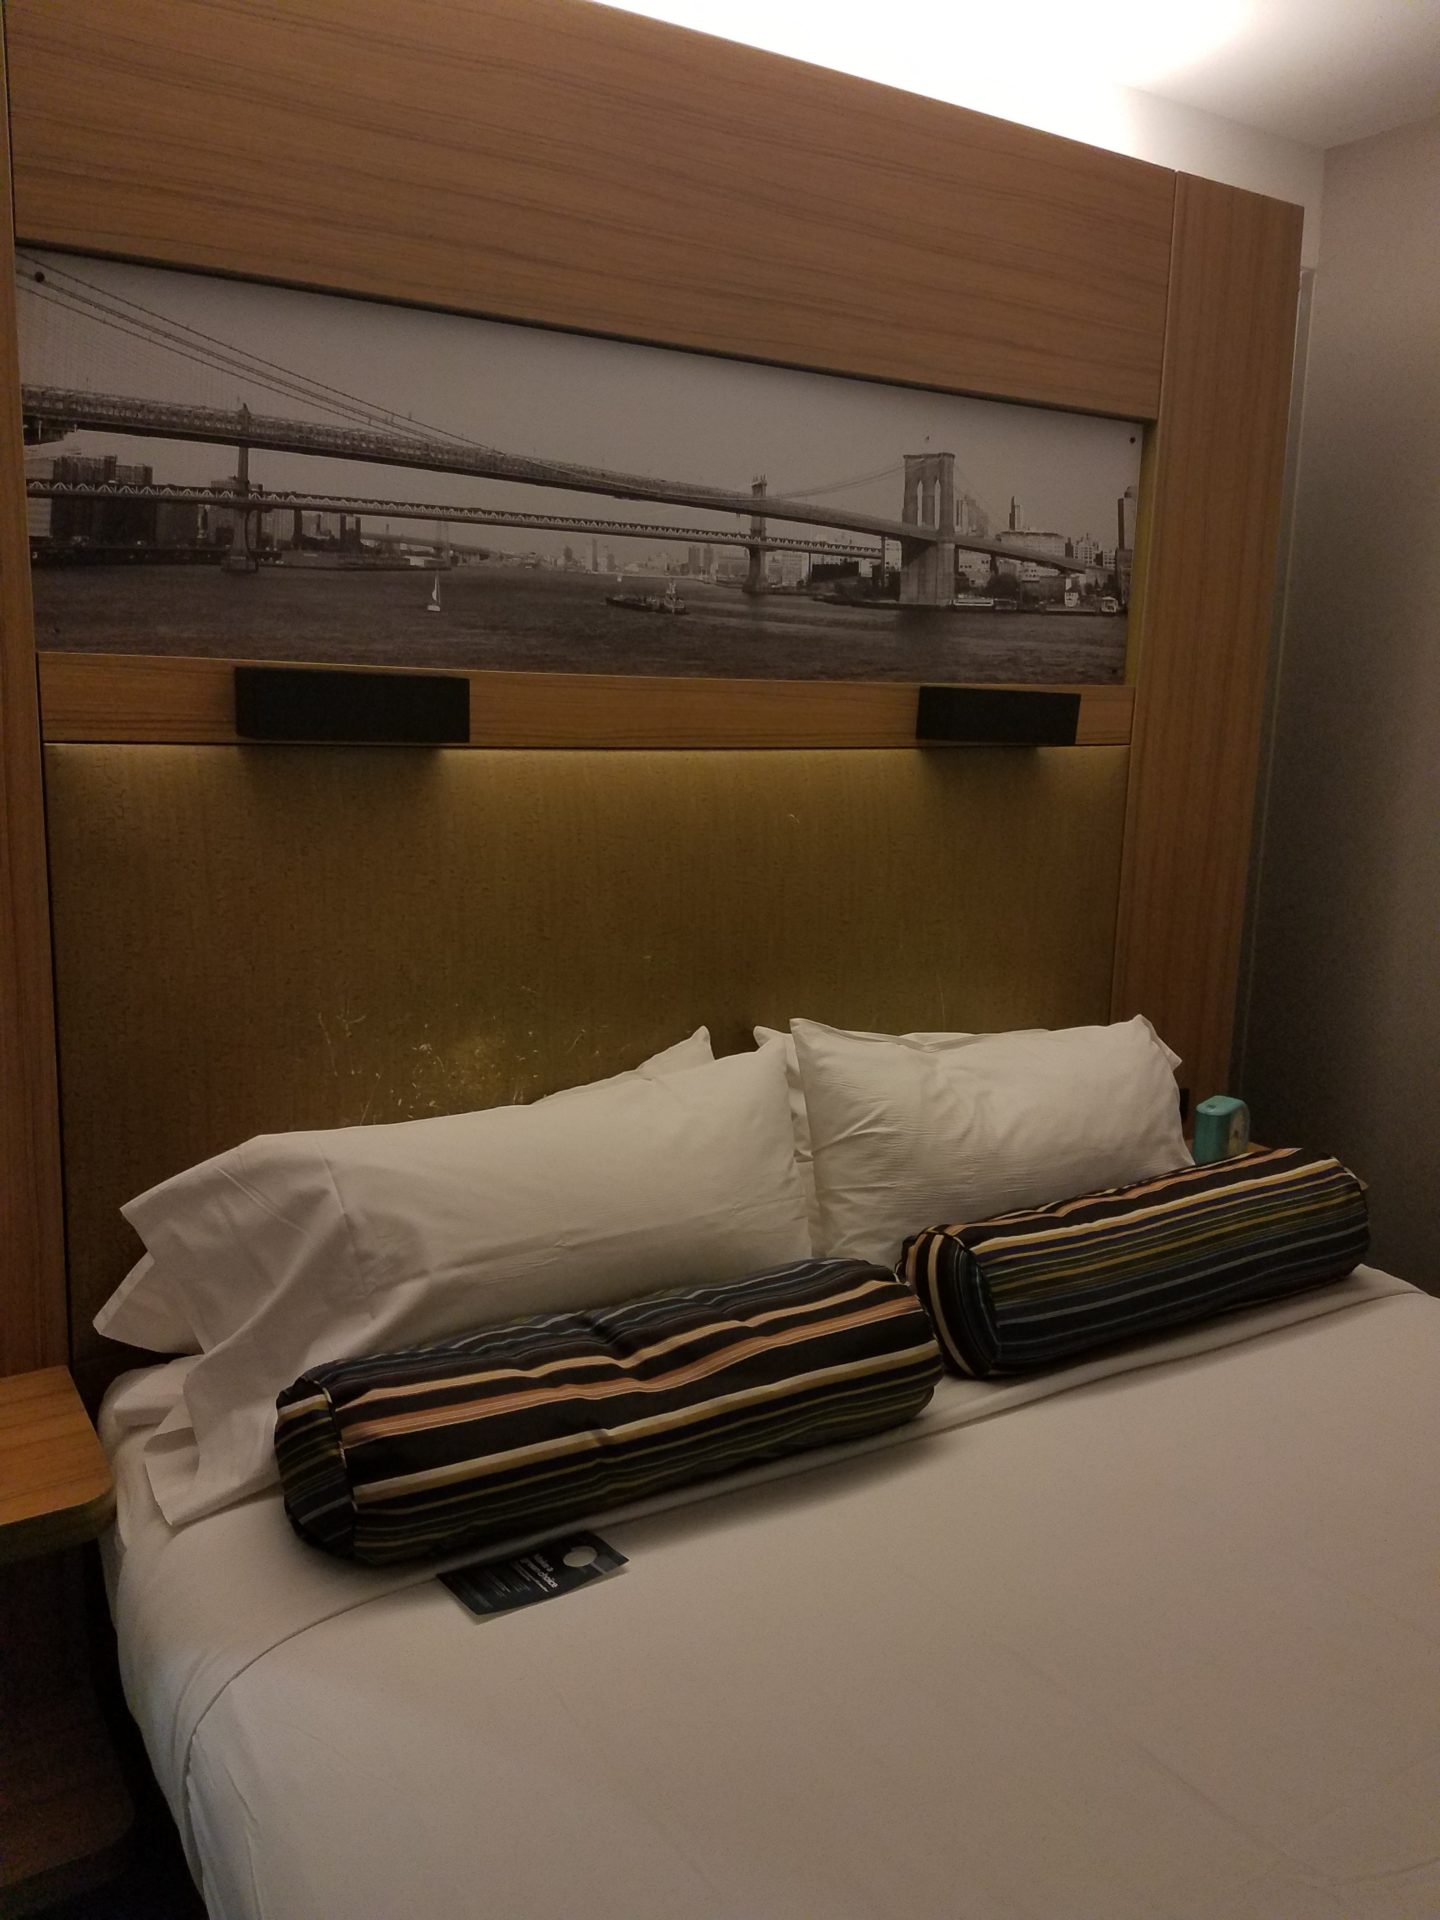 a bed with pillows and a picture of a bridge